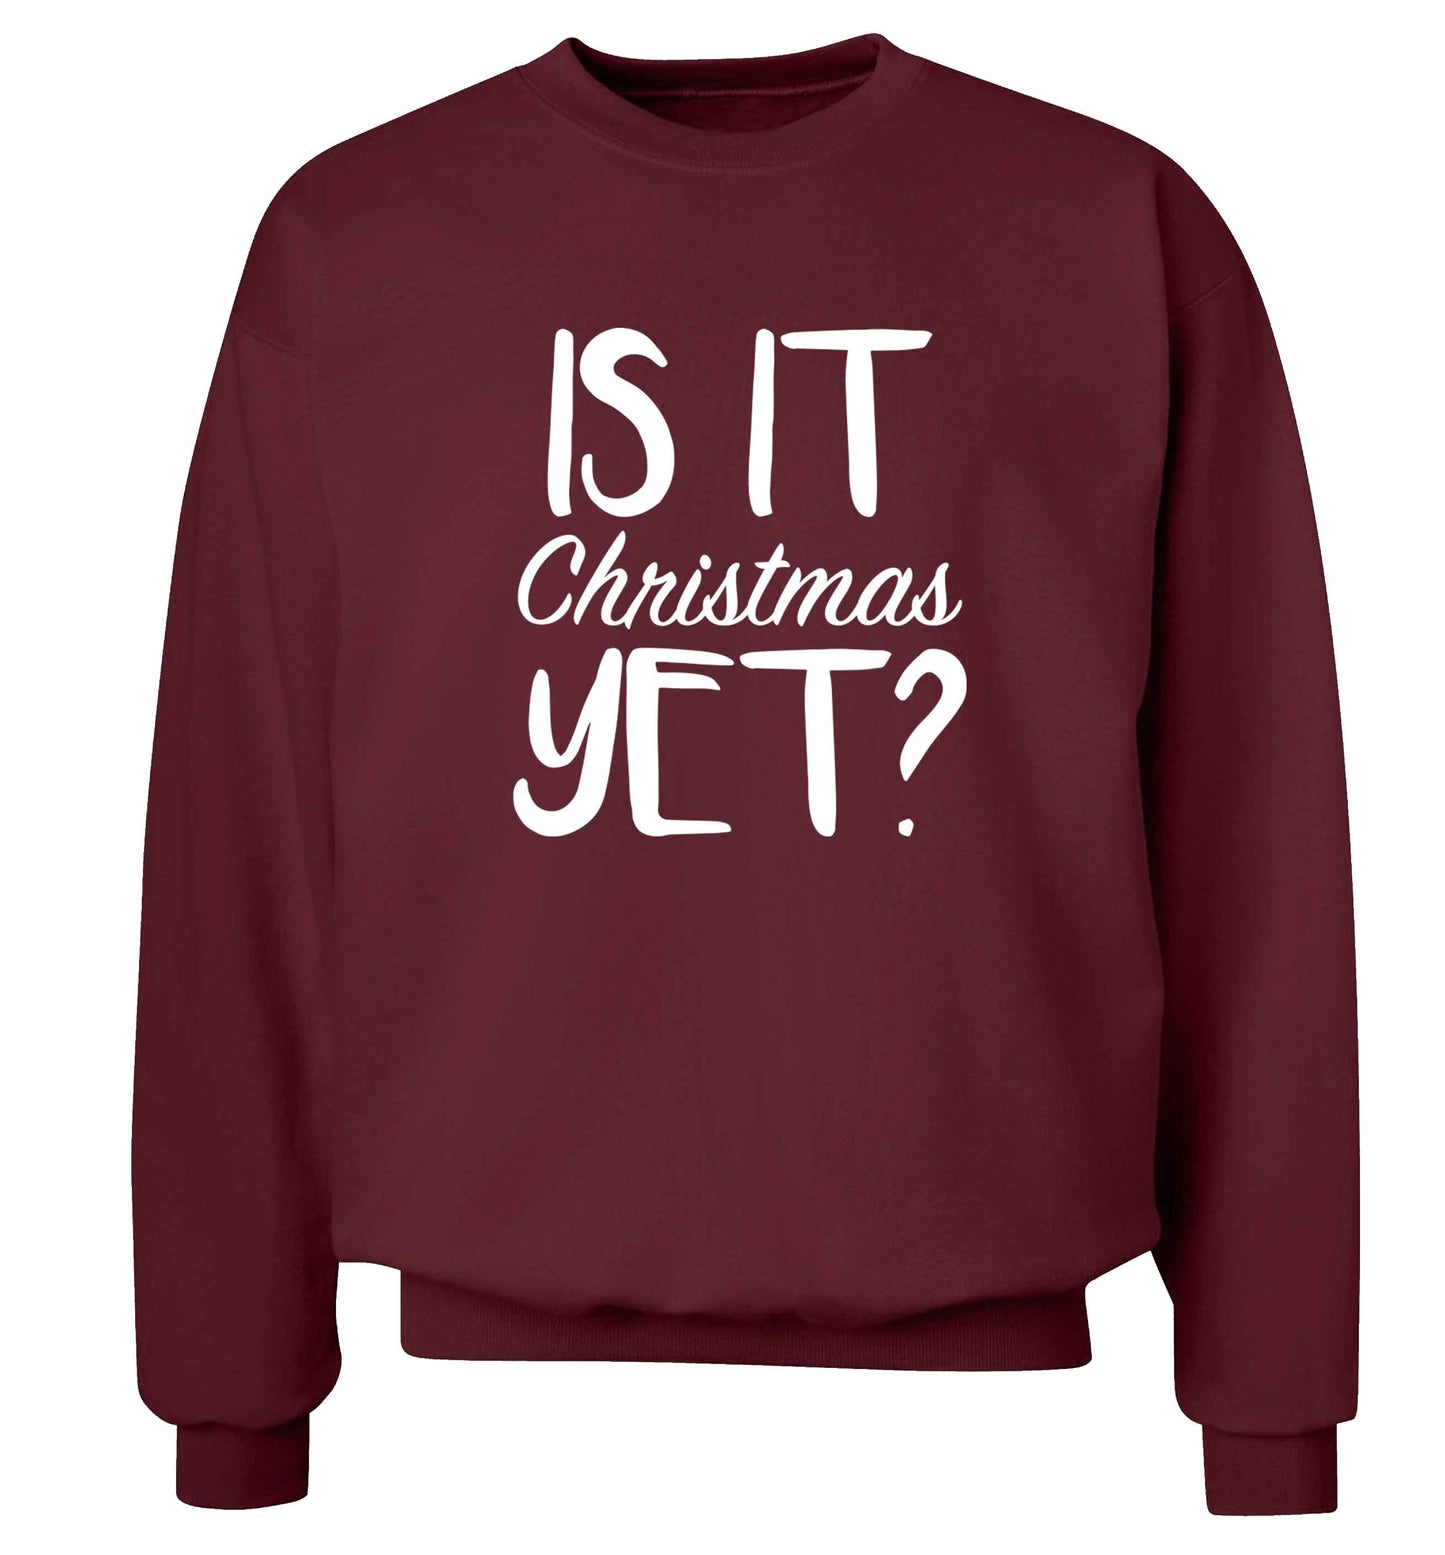 Is it Christmas yet? adult's unisex maroon sweater 2XL